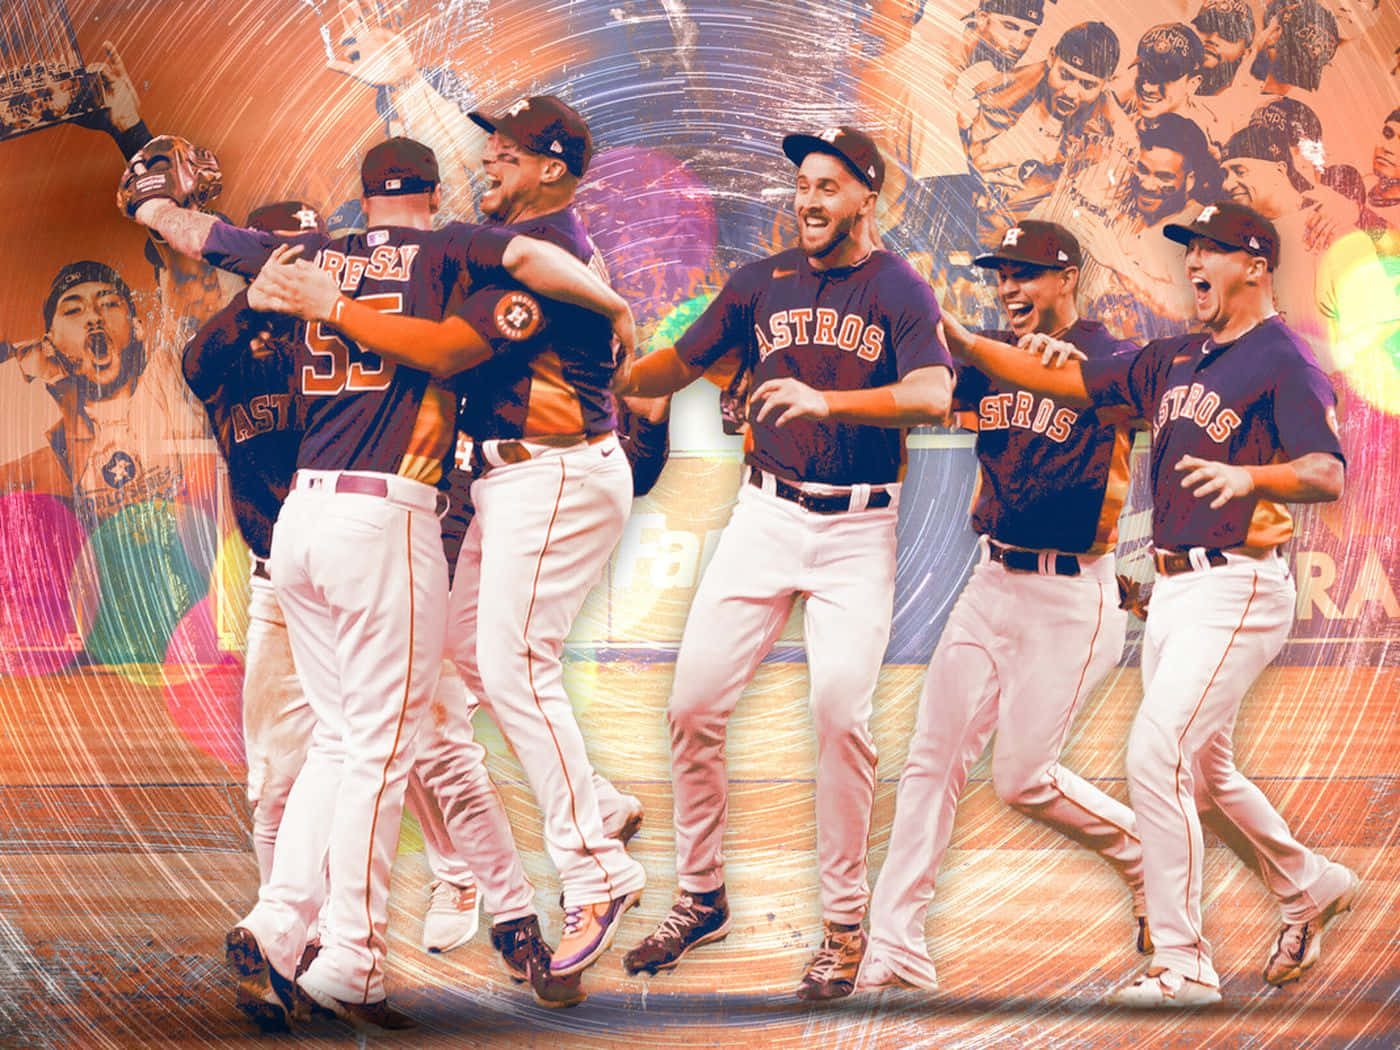 200+] Astros Backgrounds